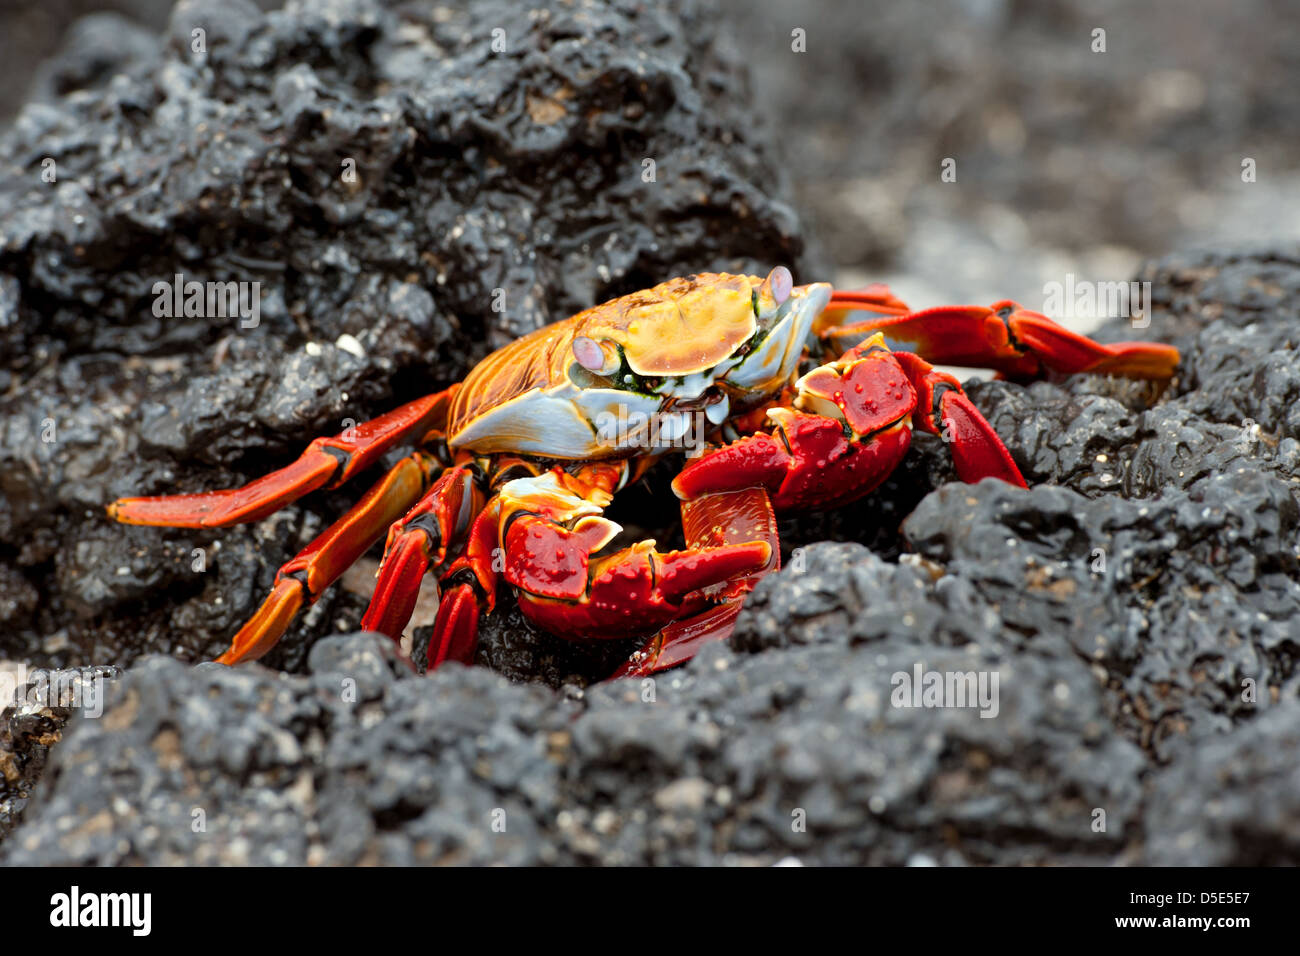 Sally Lightfoot Crab or Red Rock Crab (Grapsus grapsus) eating the claw of another crab Stock Photo